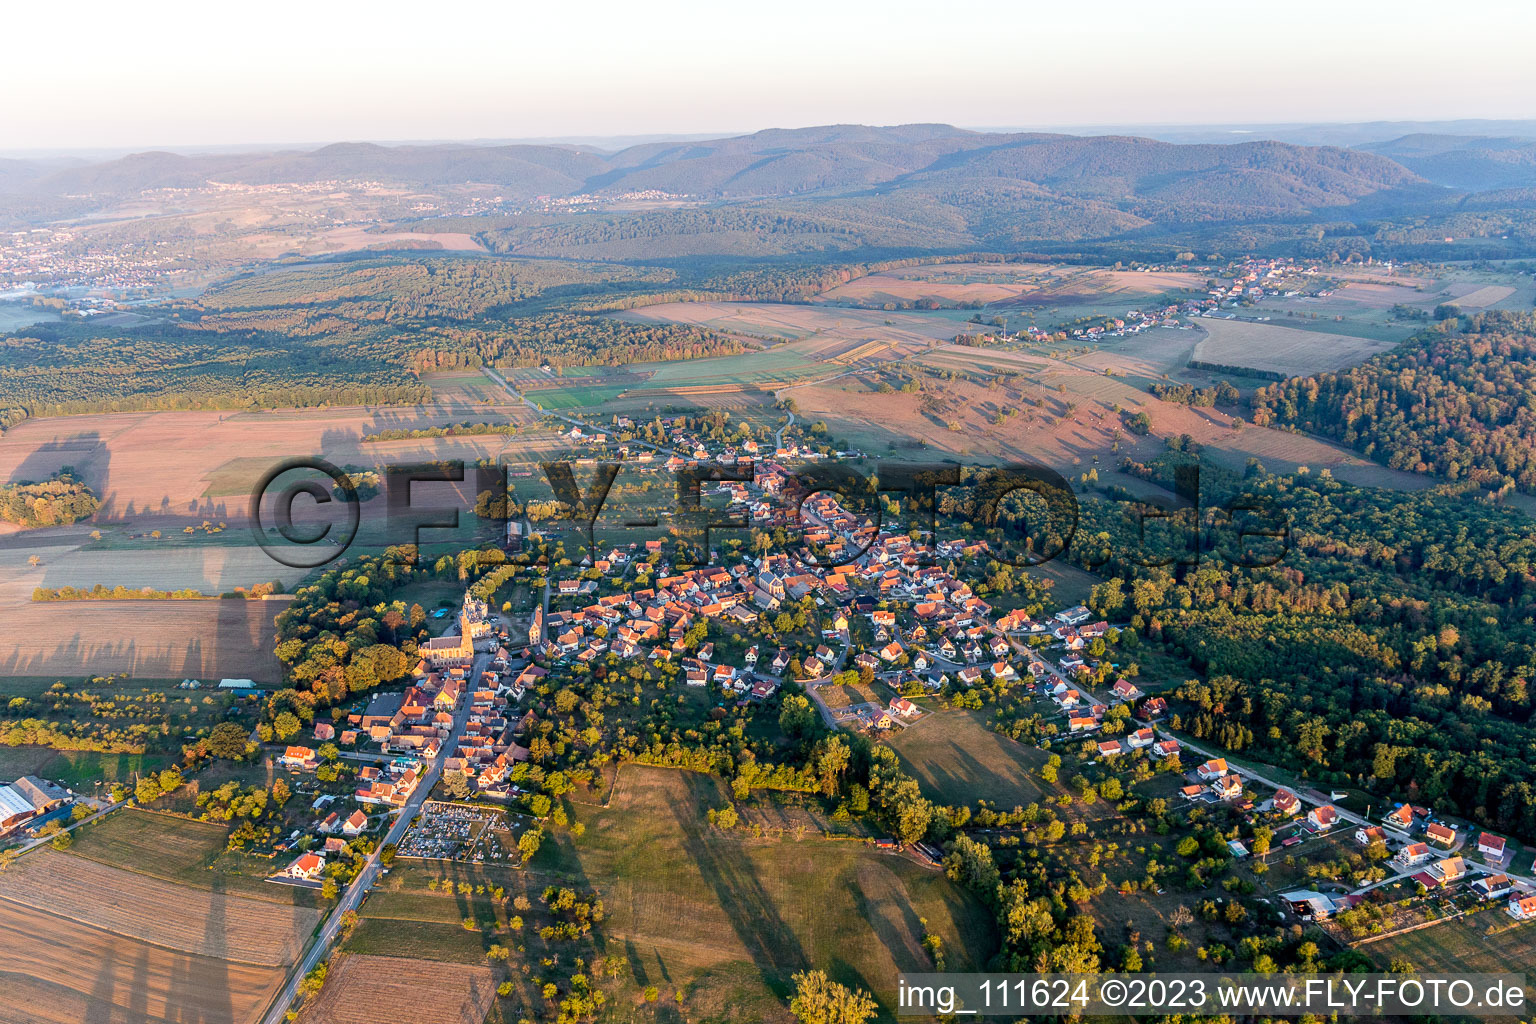 Drone image of Wœrth in the state Bas-Rhin, France